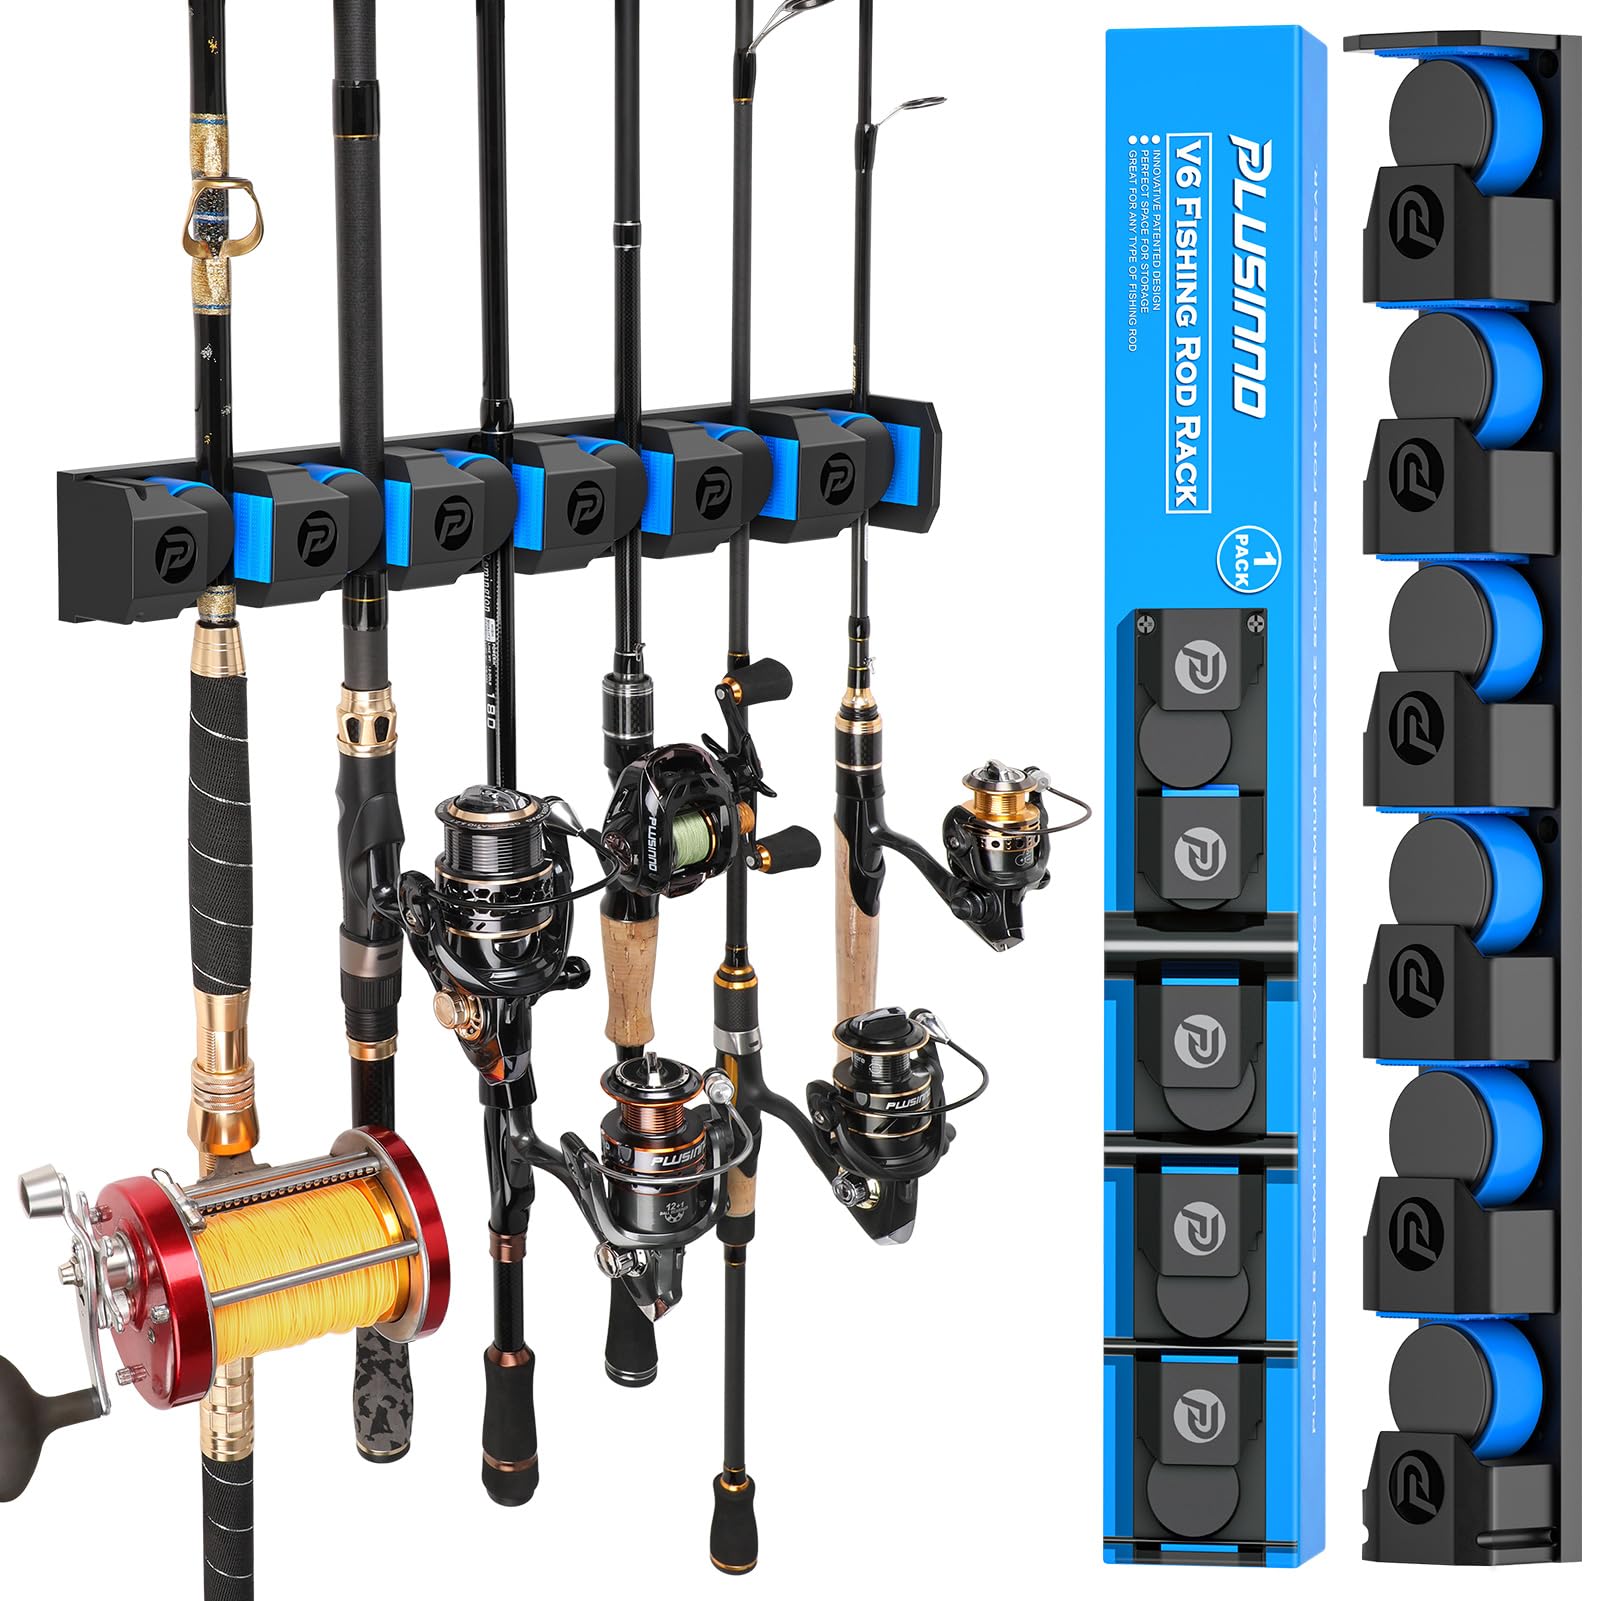 PLUSINNO V12 Fishing Rod Holders for Garage, Vertical Fishing Pole Holders  Wooden Round Storage Floor Stand, Fishing Rod/Pole Rack